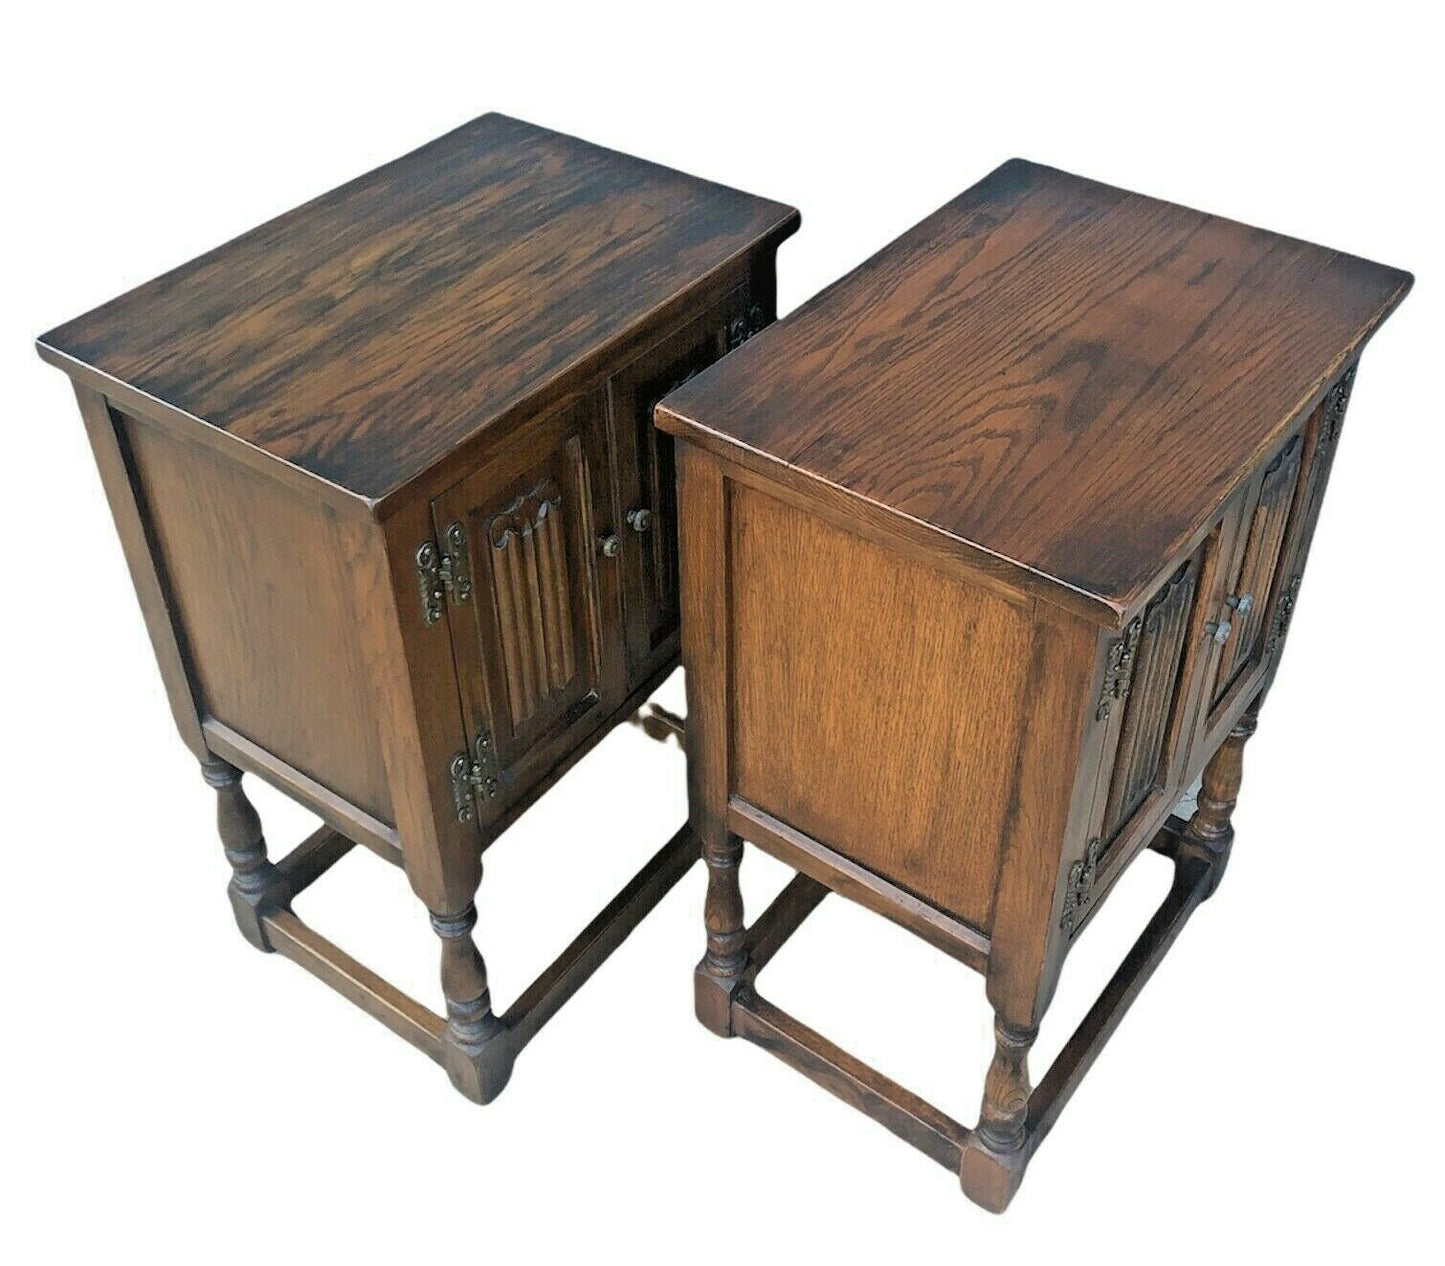 Handsome Pair Of Tudor Style Old Charm Bedsides Tables ( SOLD )